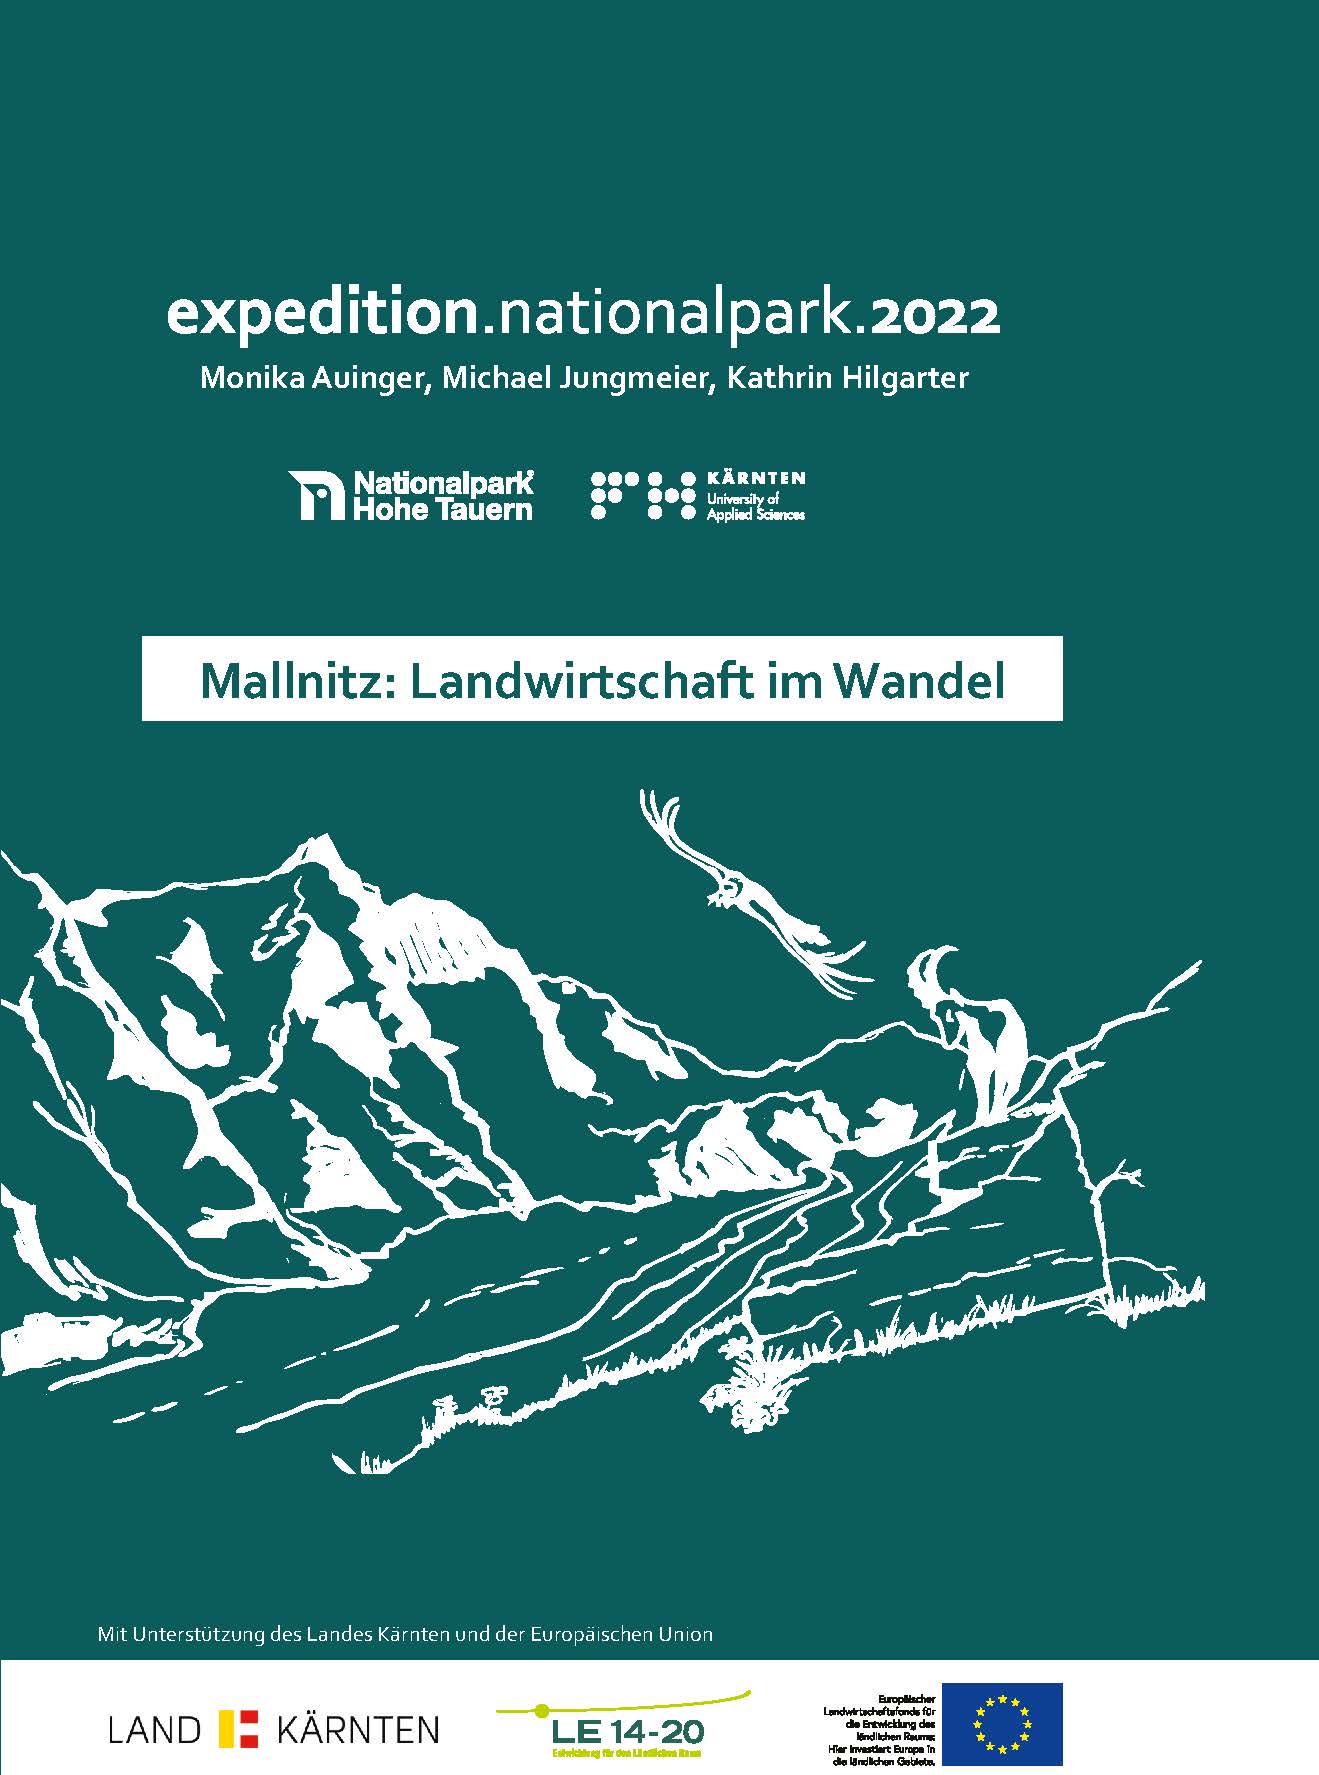 expedition.nationalpark.2022